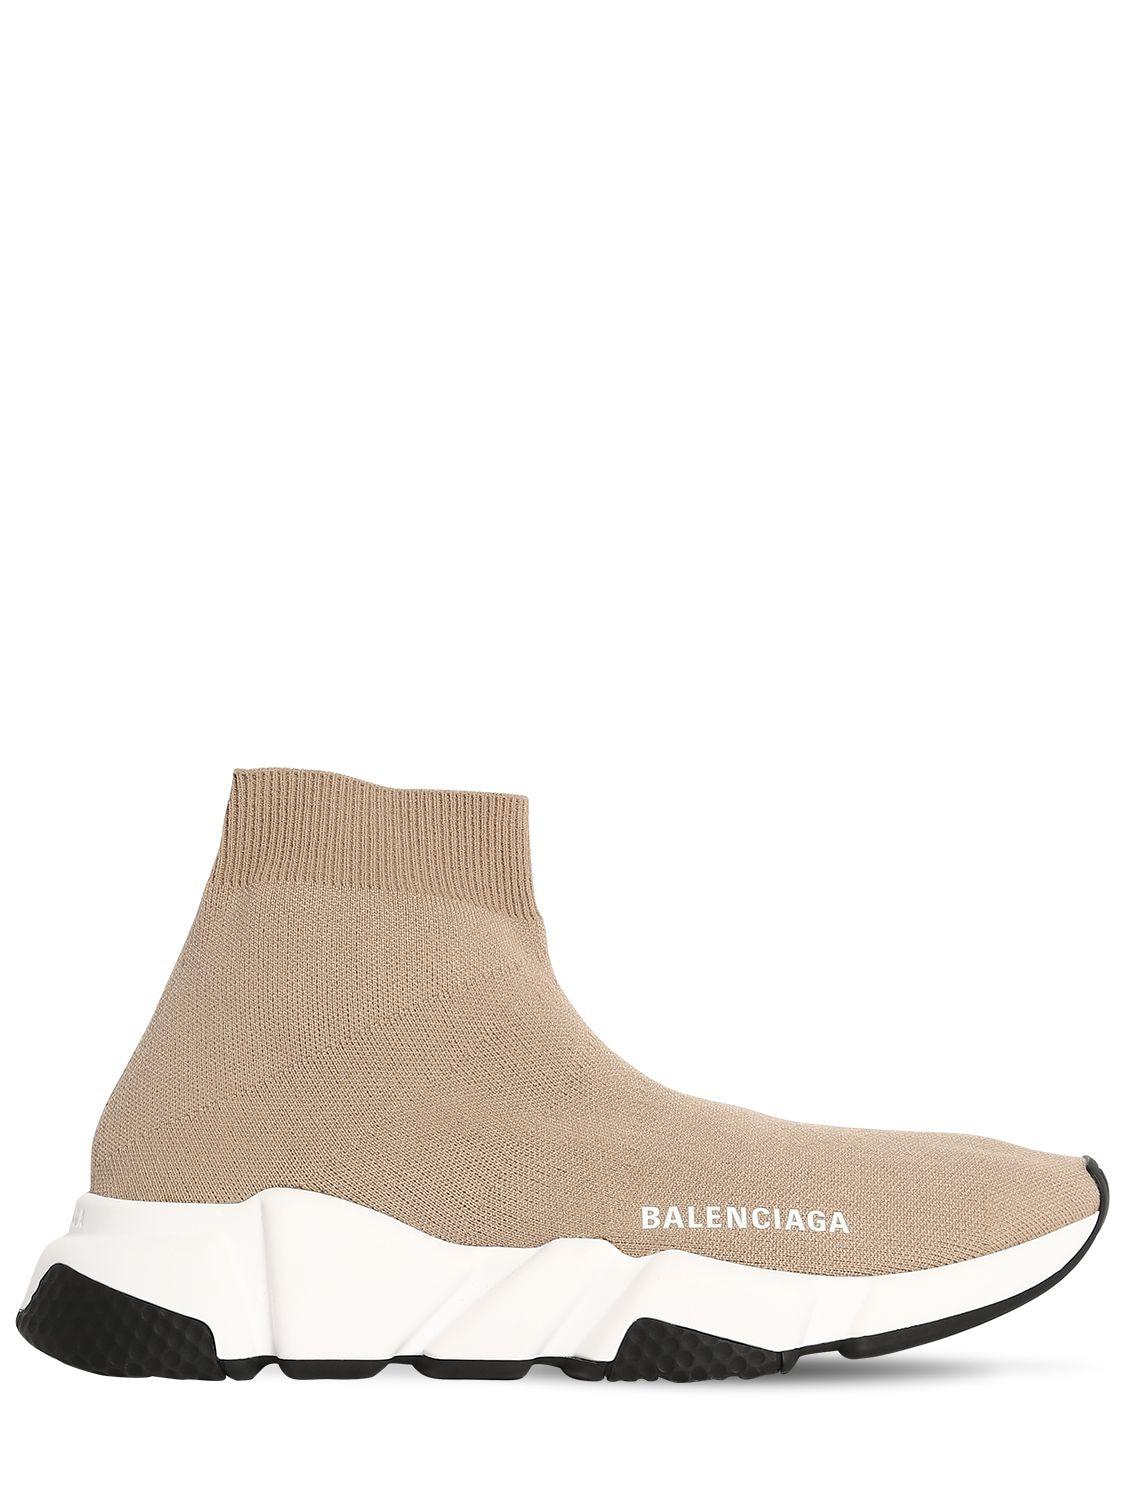 Balenciaga Leather 30mm Speed Knit Sneakers in Beige/White (Natural) - Lyst